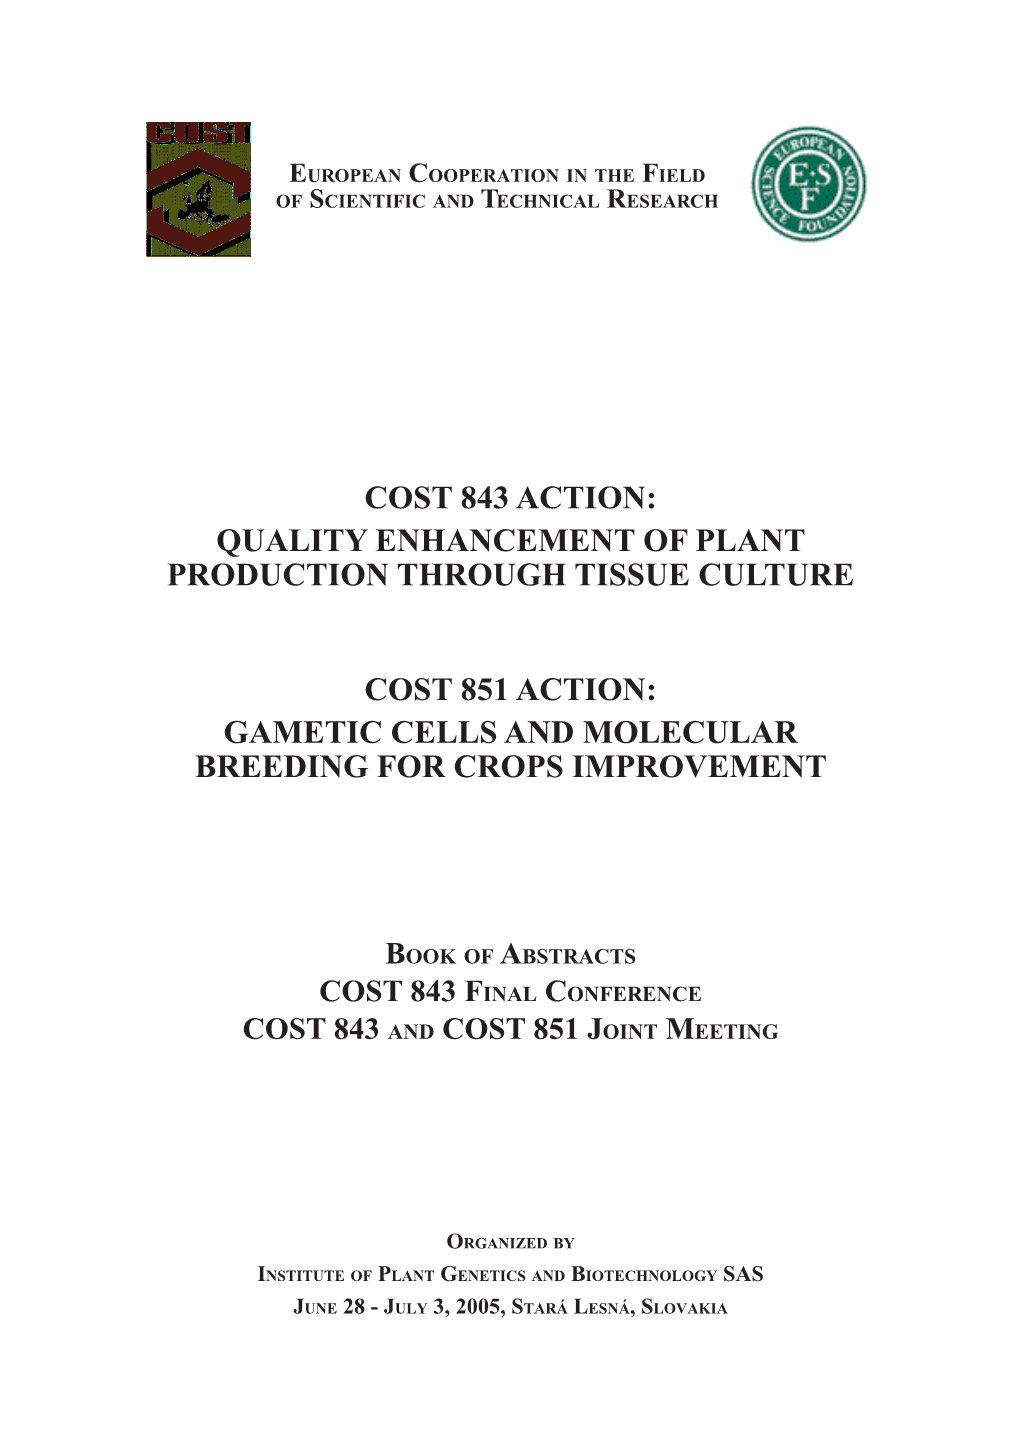 Cost 843 Action: Quality Enhancement of Plant Production Through Tissue Culture